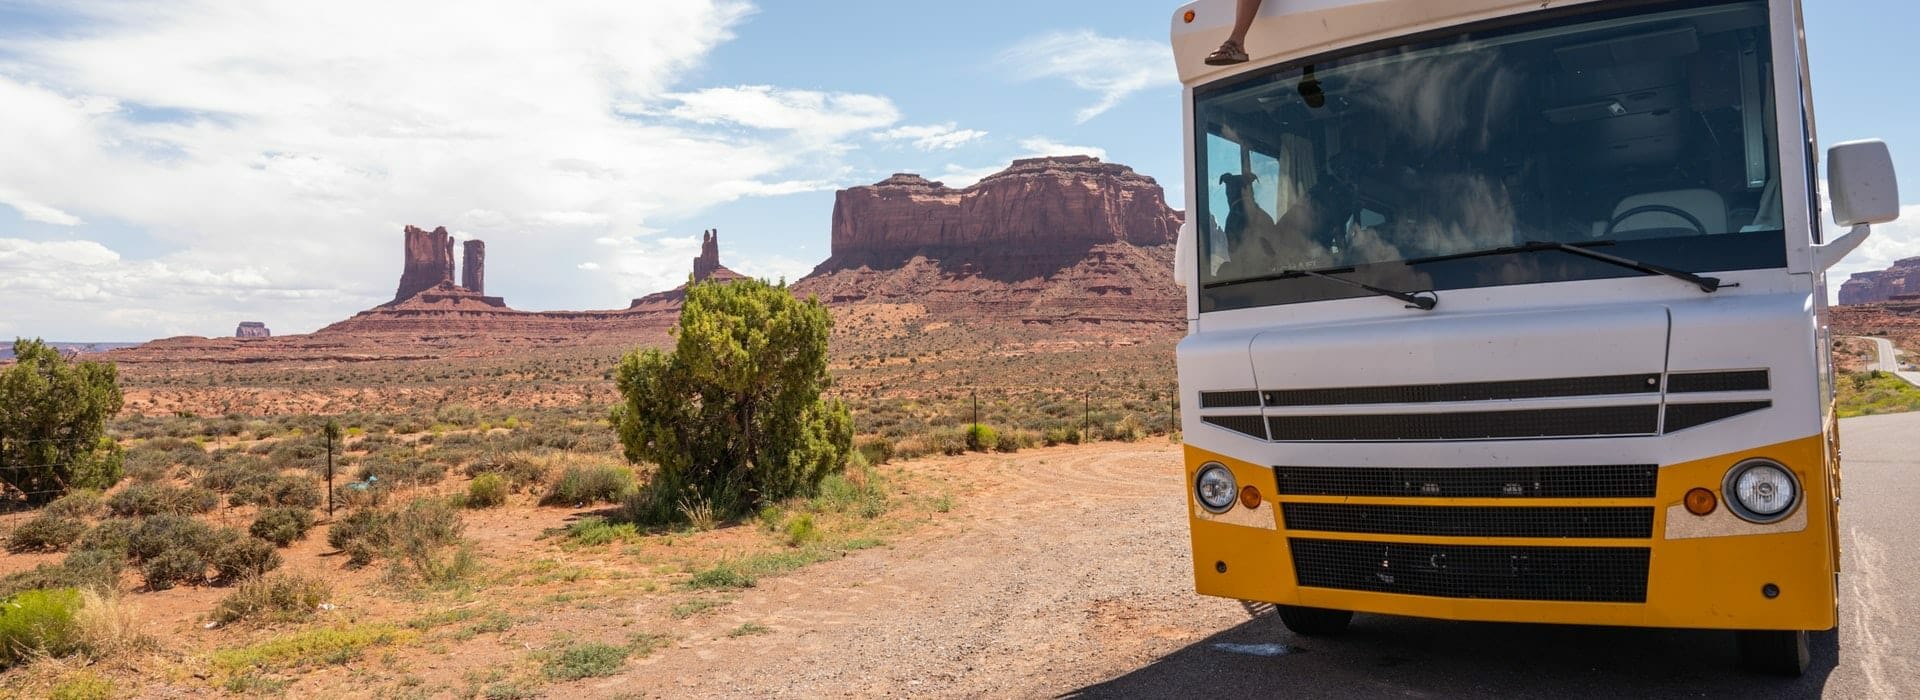 5 Best RV Insurance Companies on the Market Today